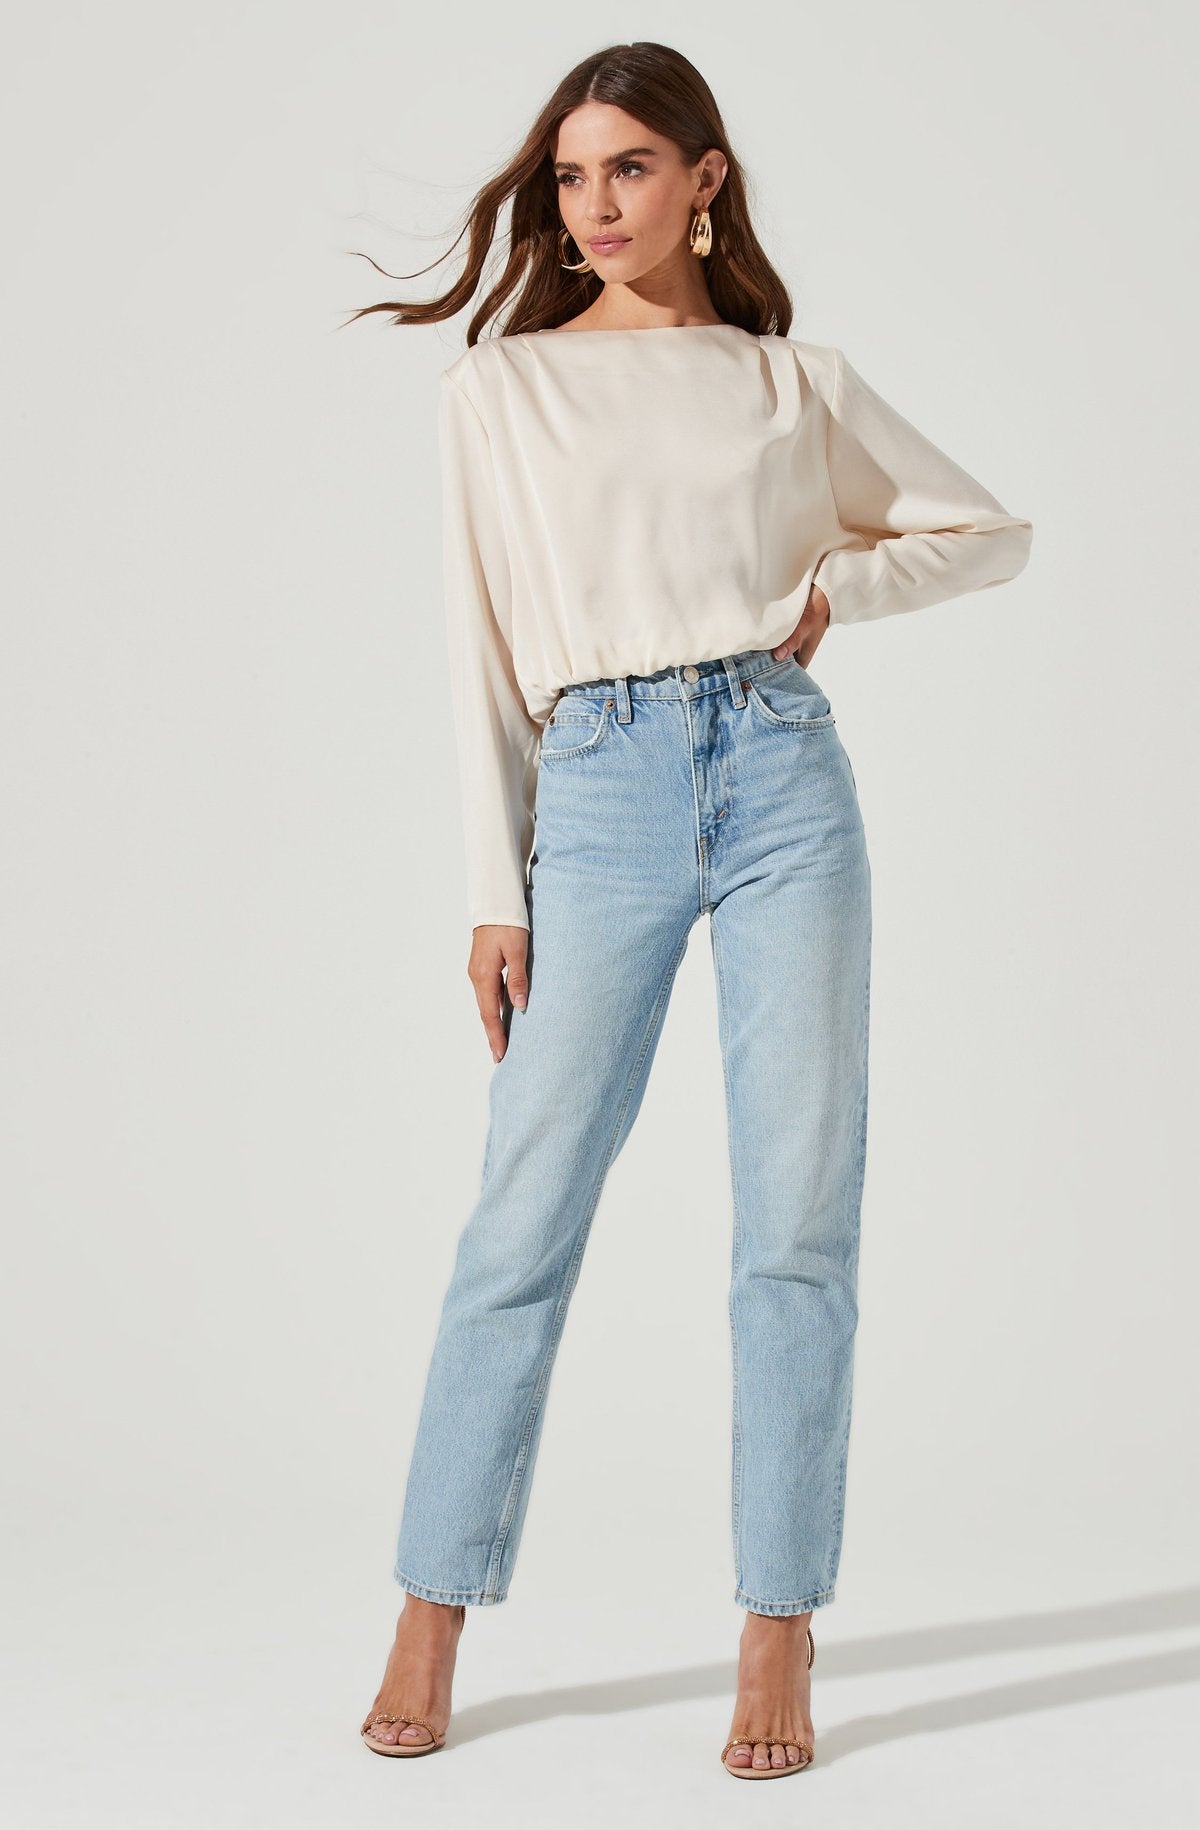 Pleated Shoulder Top